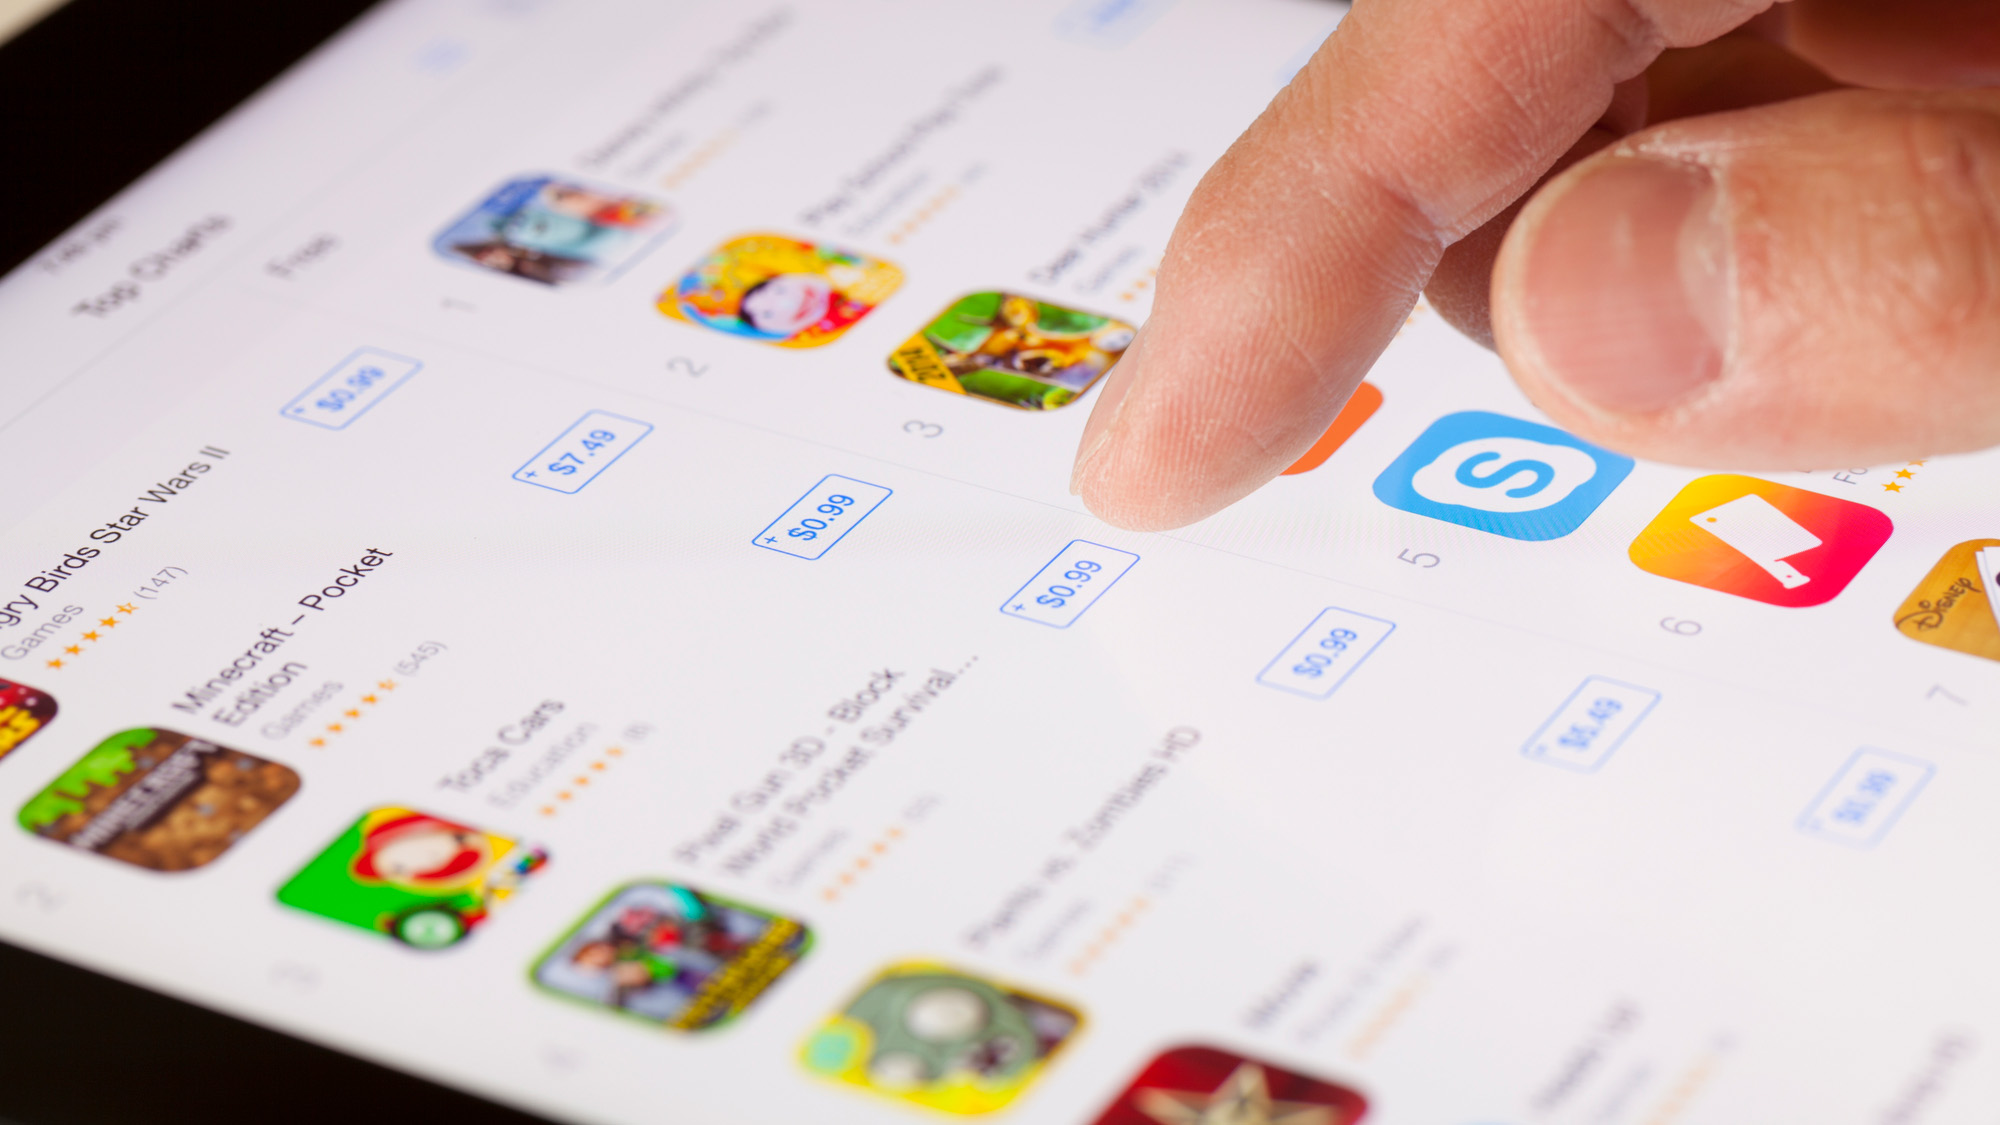 A new App Store showcase highlights high-quality games free of in